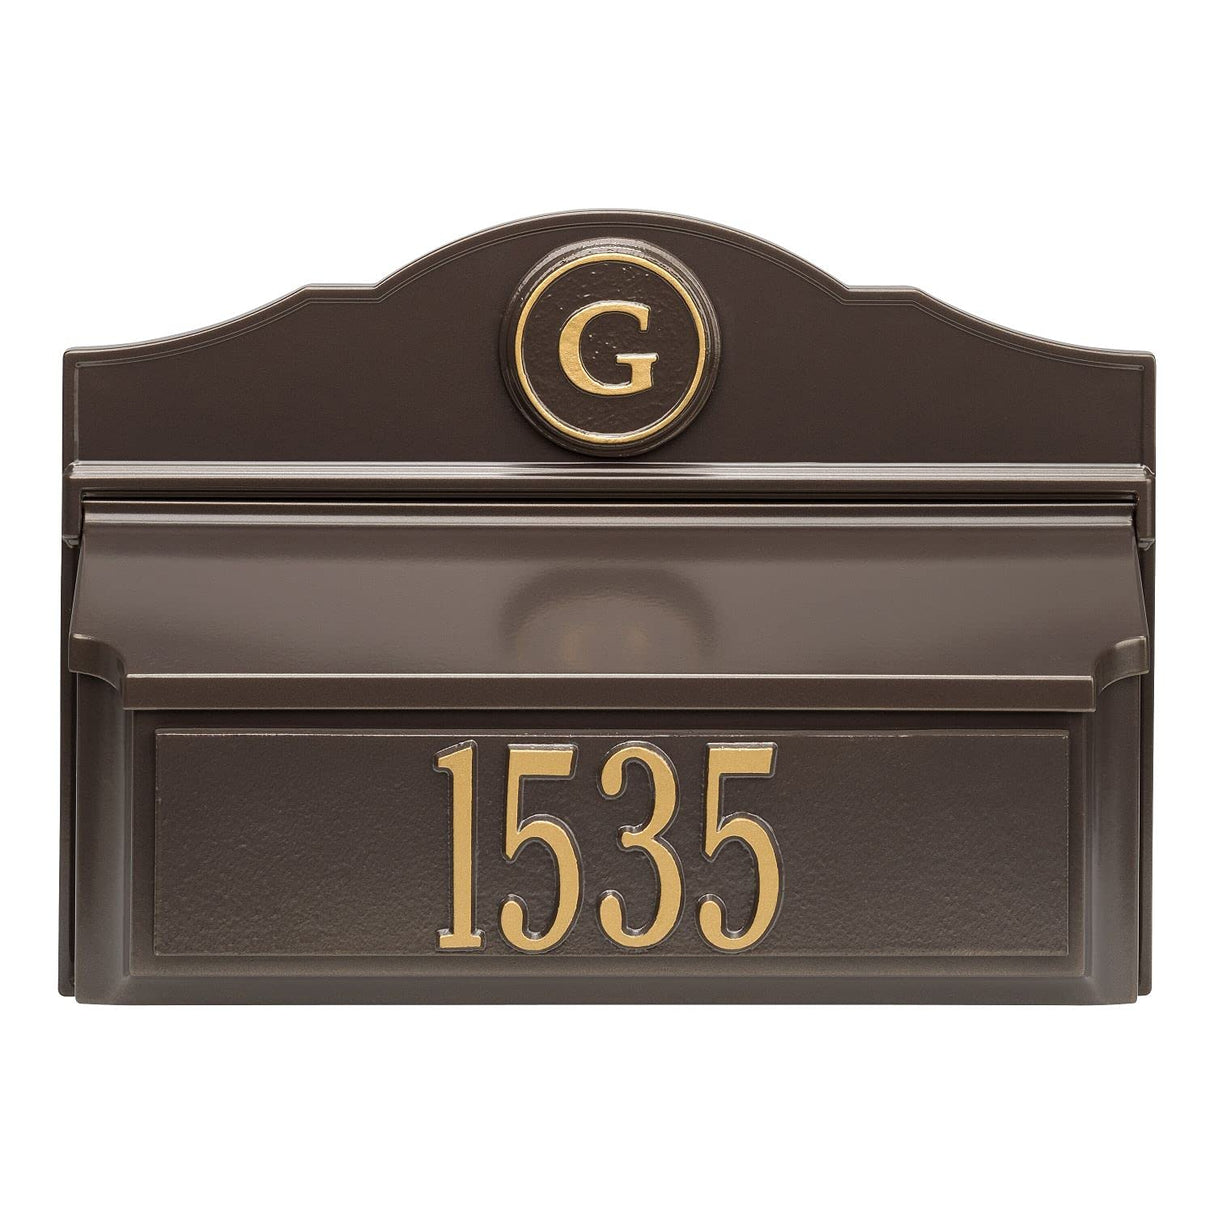 Whitehall 11249 - Colonial Wall Mailbox Package #1 (Mailbox, Plaque & Monogram)